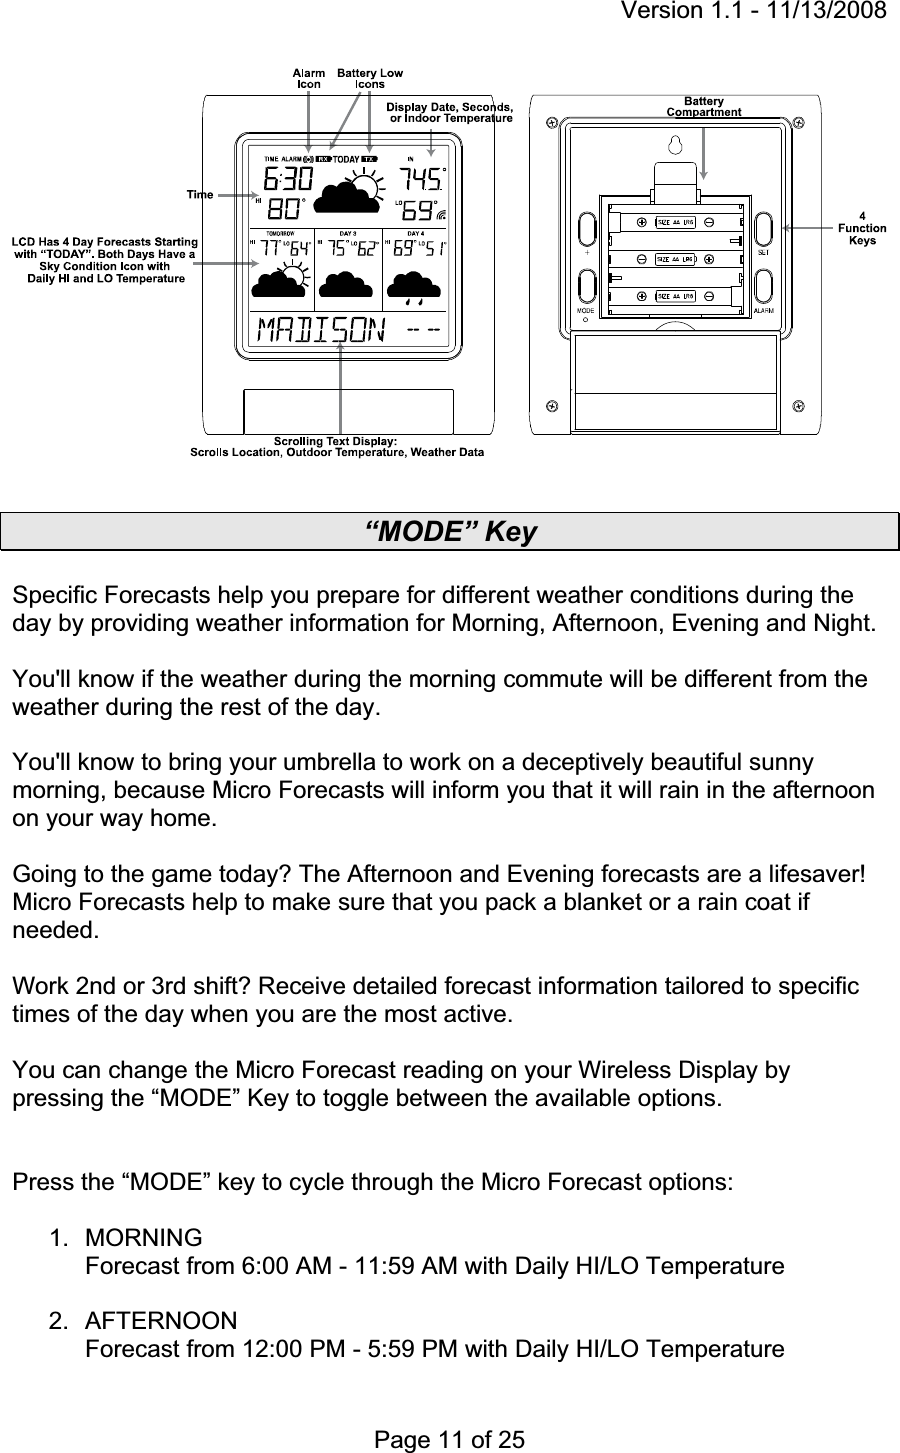 Version 1.1 - 11/13/2008 Page 11 of 25 “MODE” Key Specific Forecasts help you prepare for different weather conditions during the day by providing weather information for Morning, Afternoon, Evening and Night.You&apos;ll know if the weather during the morning commute will be different from the weather during the rest of the day. You&apos;ll know to bring your umbrella to work on a deceptively beautiful sunny morning, because Micro Forecasts will inform you that it will rain in the afternoon on your way home.Going to the game today? The Afternoon and Evening forecasts are a lifesaver! Micro Forecasts help to make sure that you pack a blanket or a rain coat if needed. Work 2nd or 3rd shift? Receive detailed forecast information tailored to specific times of the day when you are the most active. You can change the Micro Forecast reading on your Wireless Display by pressing the “MODE” Key to toggle between the available options. Press the “MODE” key to cycle through the Micro Forecast options: 1. MORNING  Forecast from 6:00 AM - 11:59 AM with Daily HI/LO Temperature 2. AFTERNOON  Forecast from 12:00 PM - 5:59 PM with Daily HI/LO Temperature 